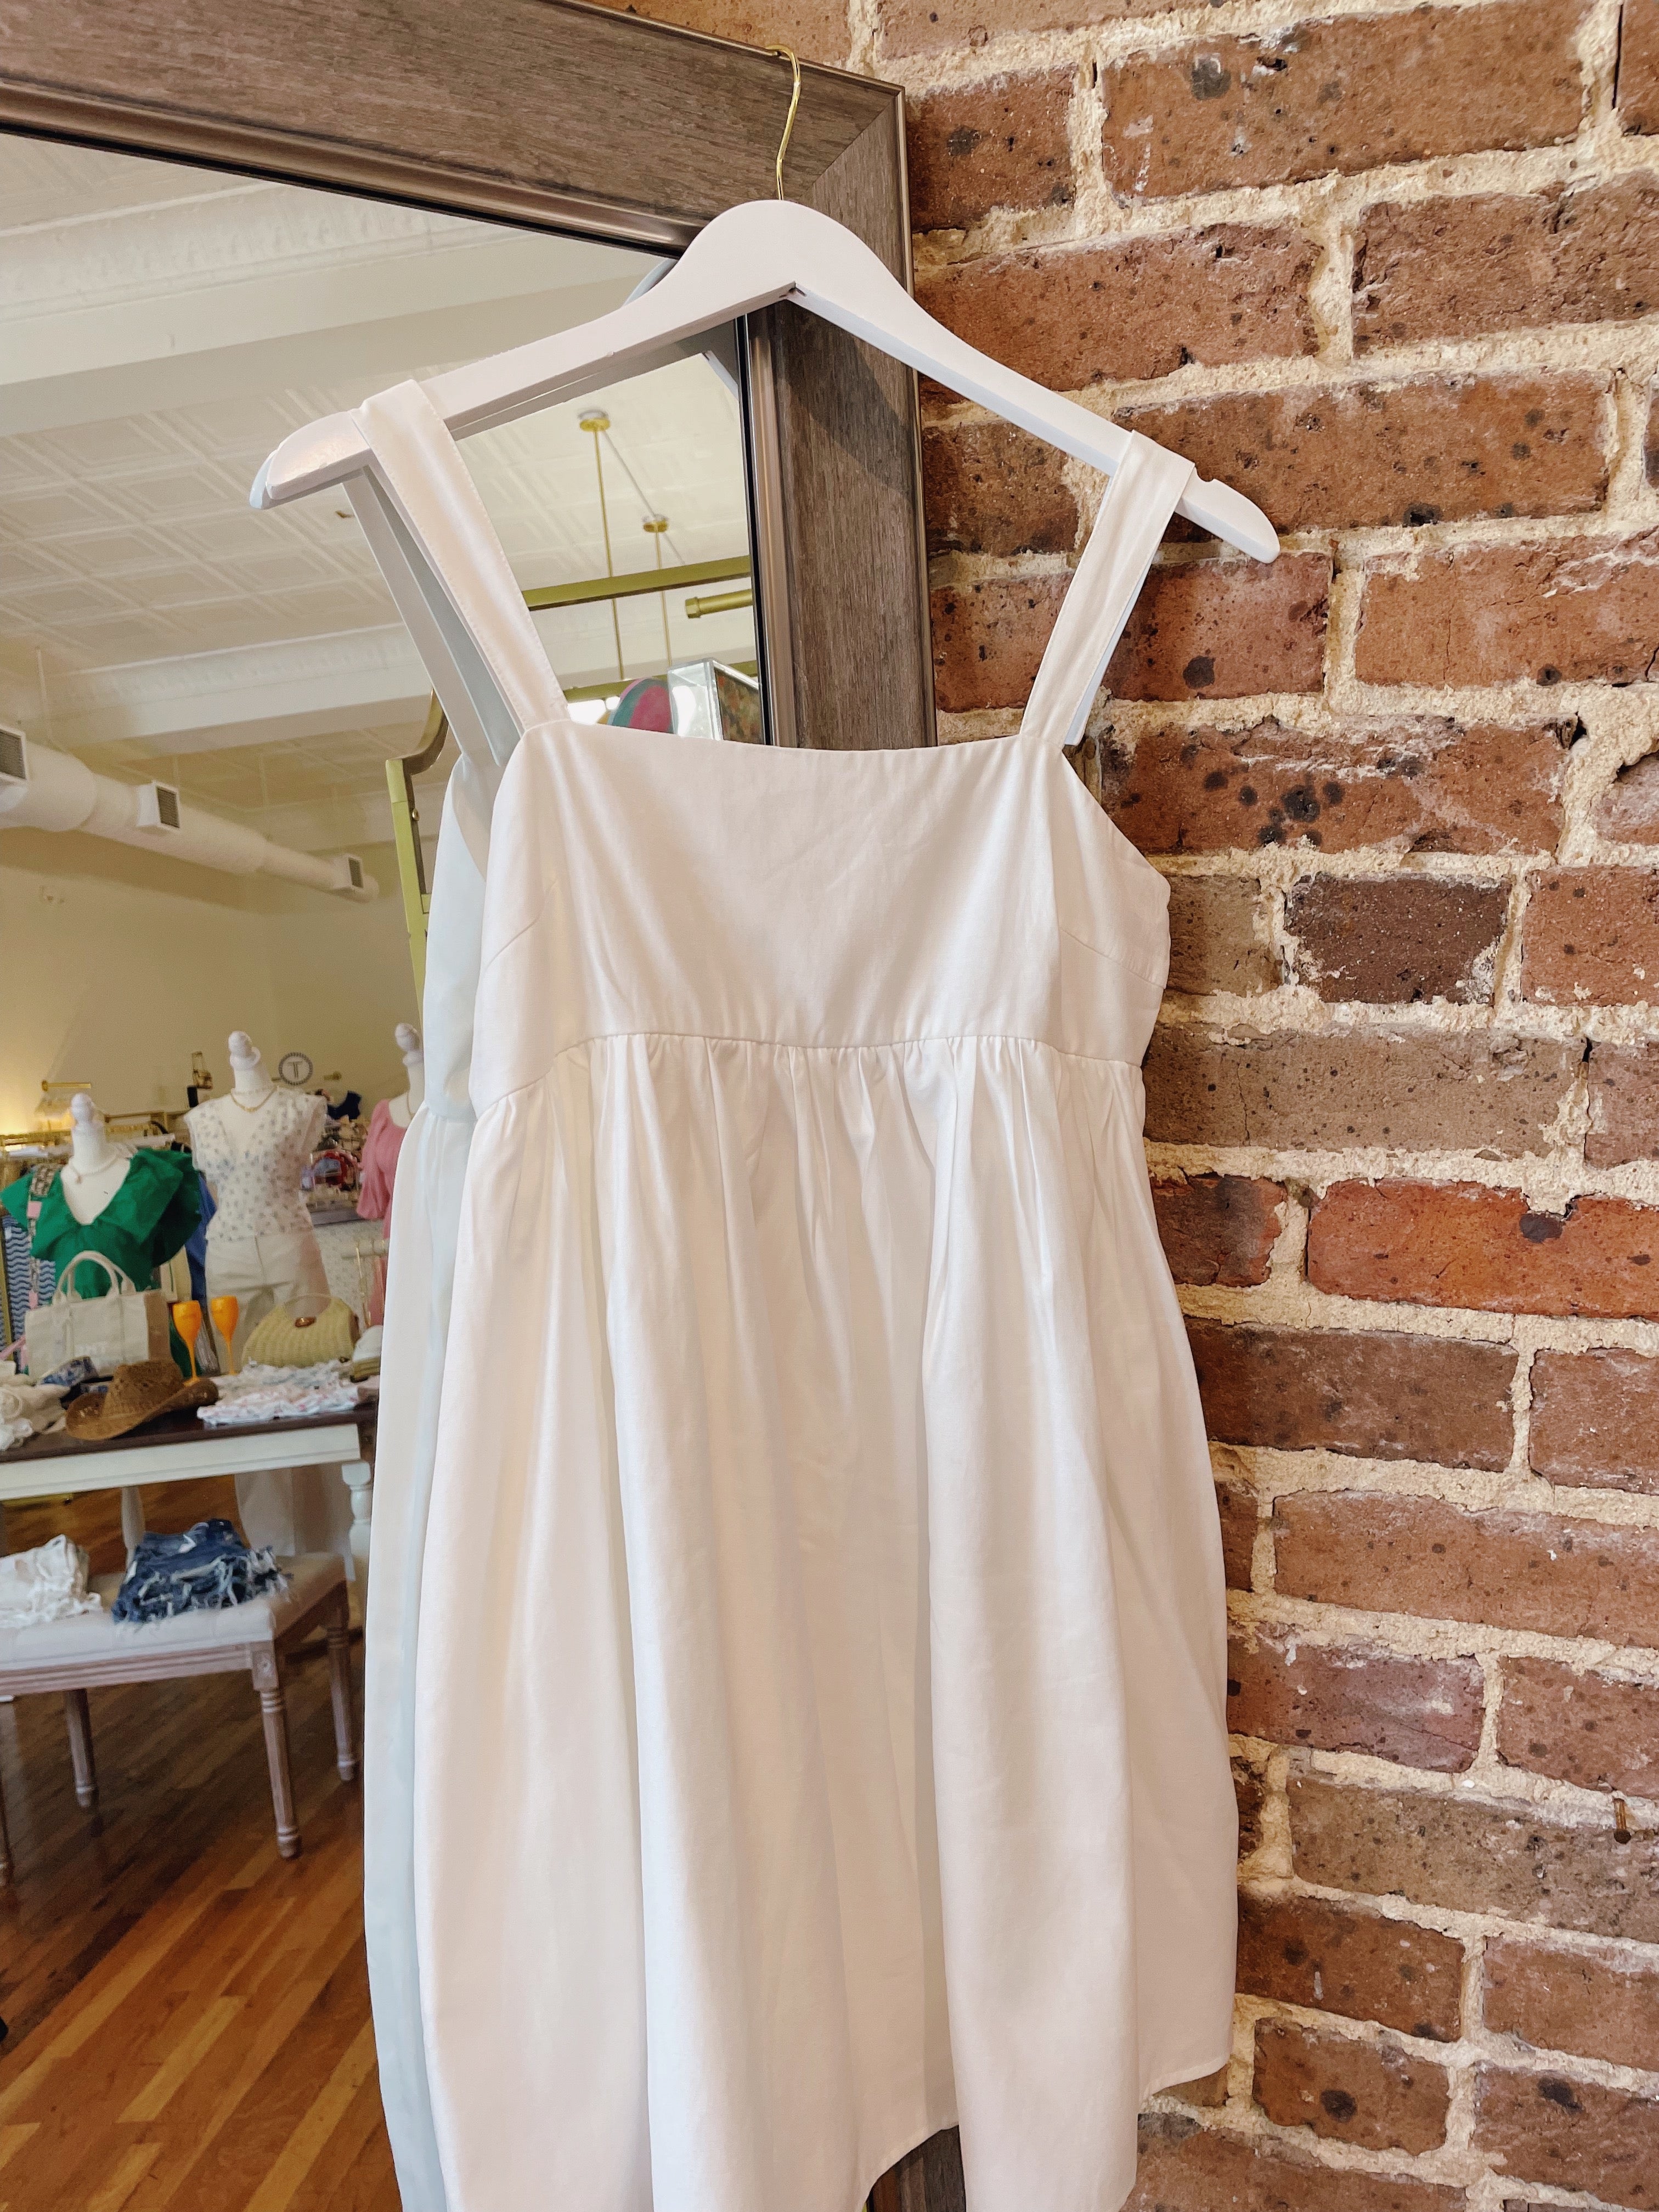 She’s All That Babydoll Dress - White